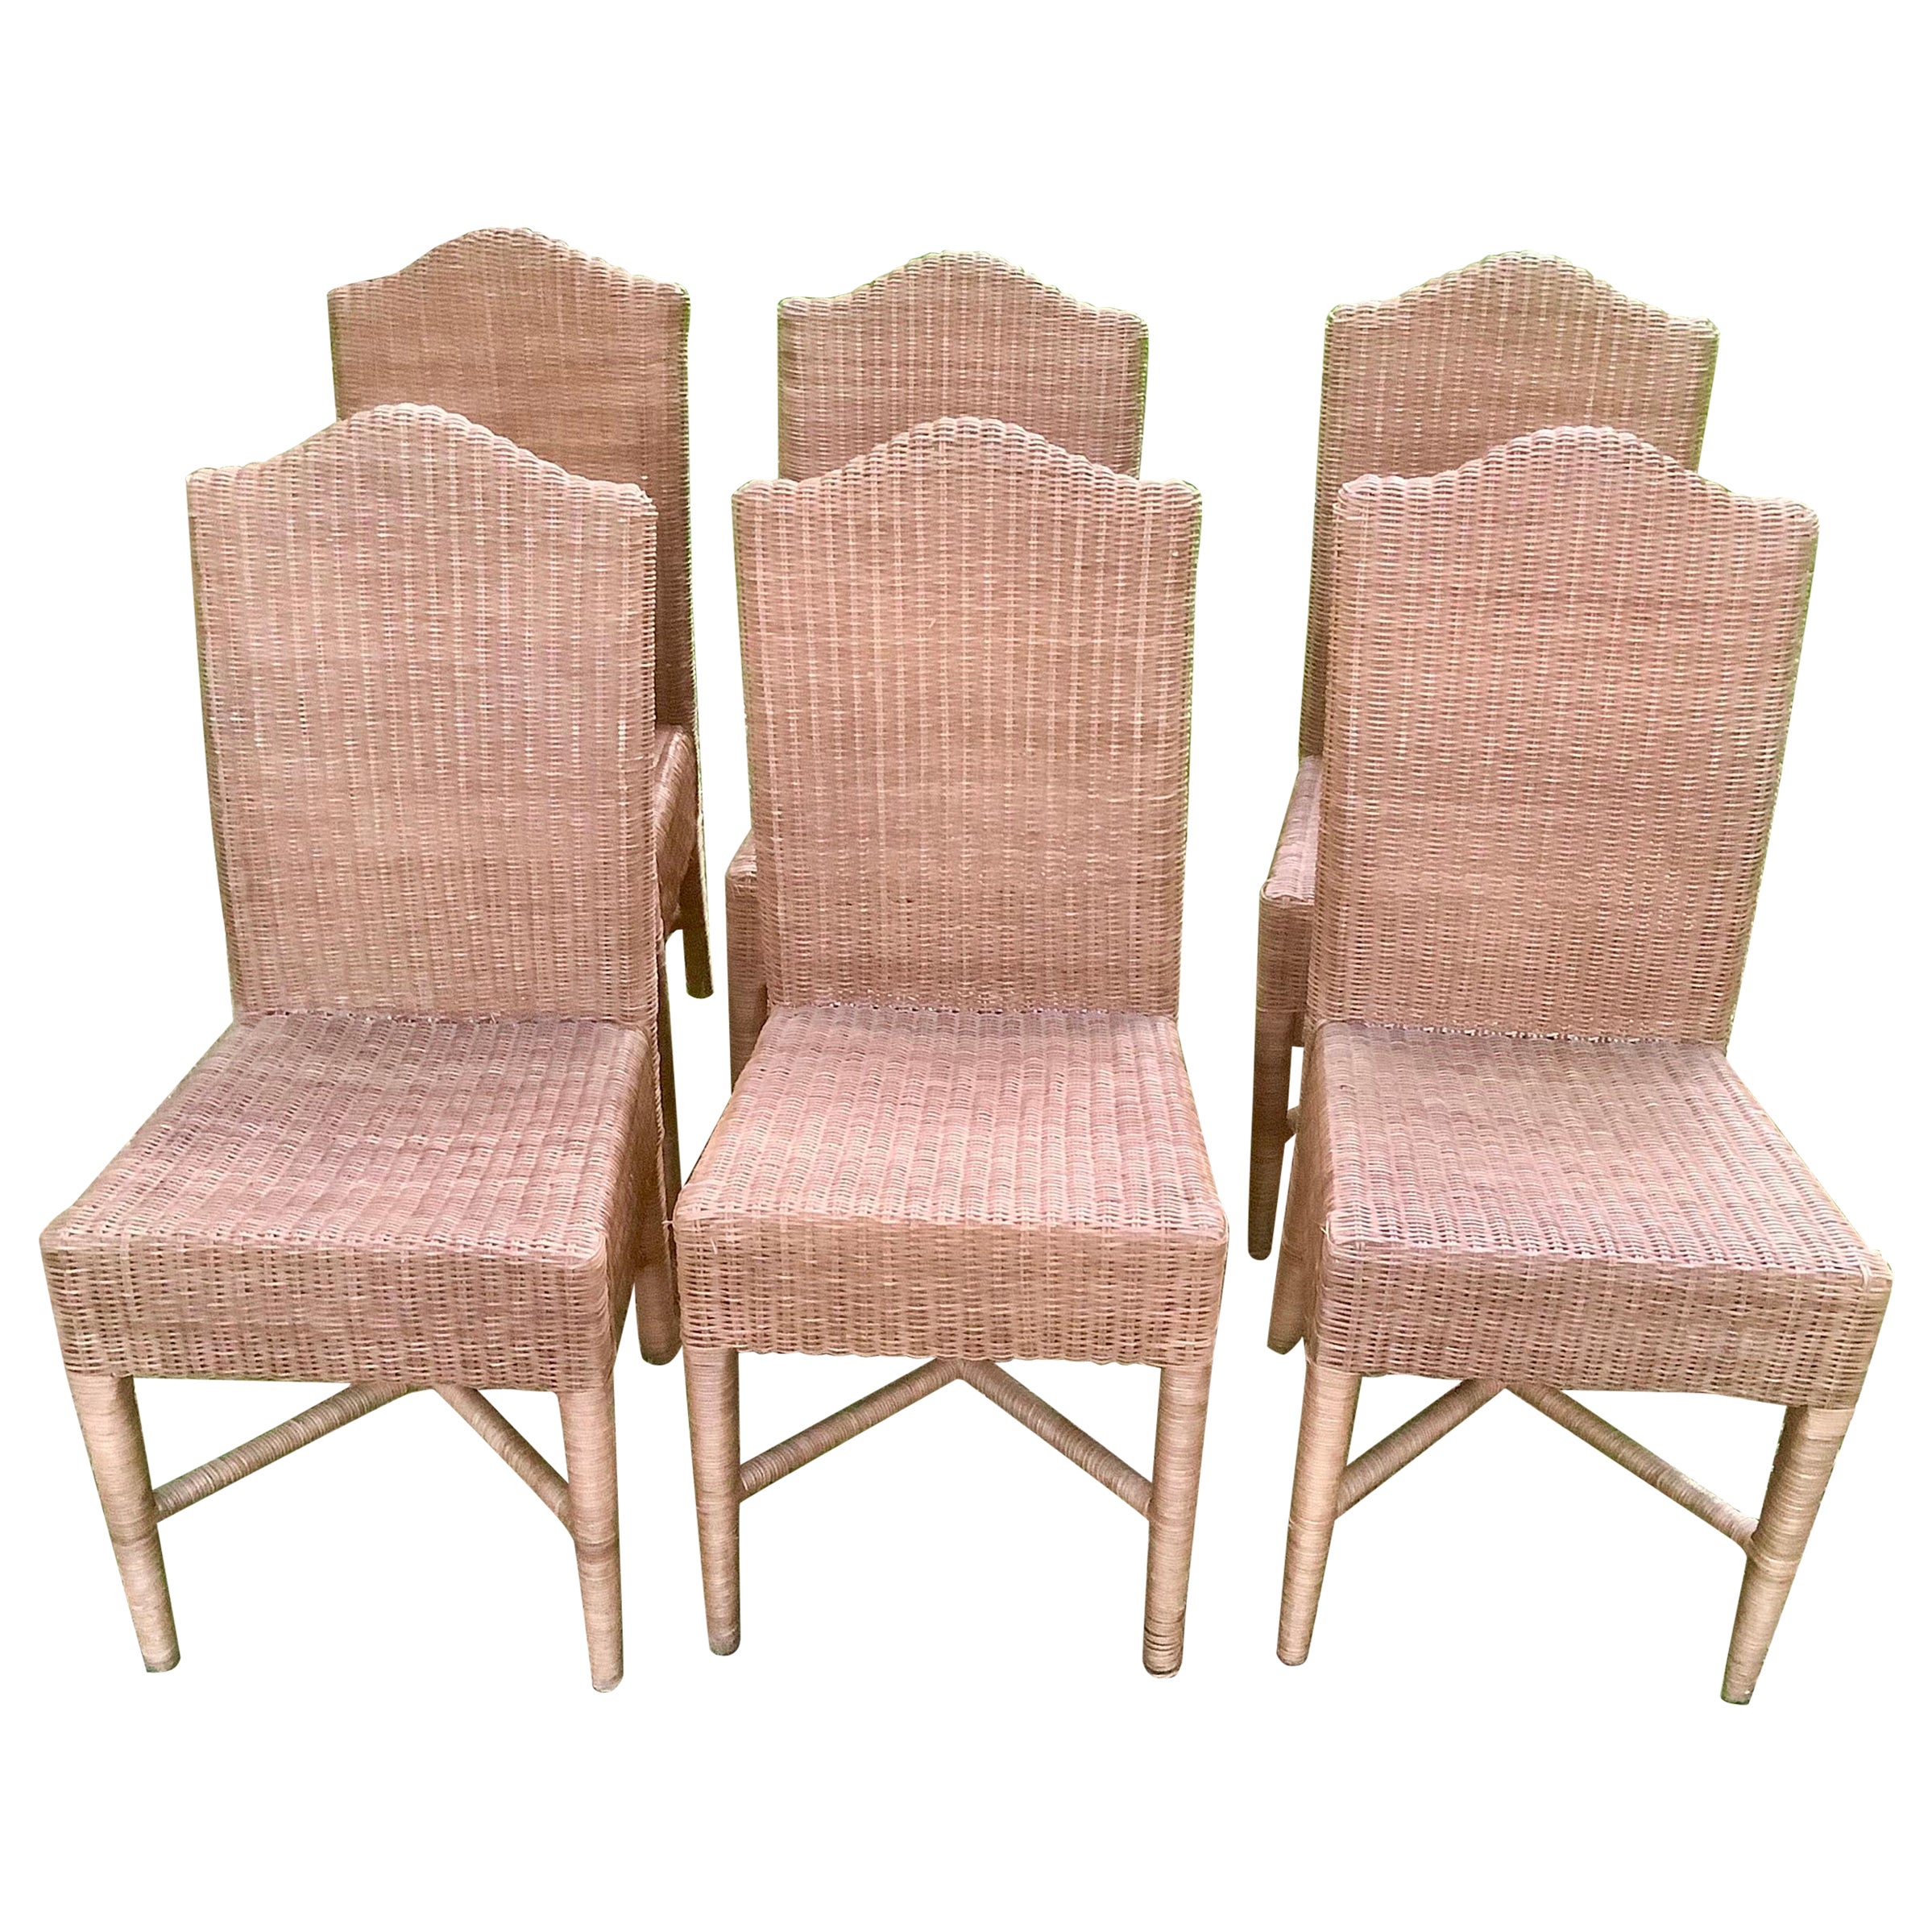 How do I protect my woven dining room chairs?